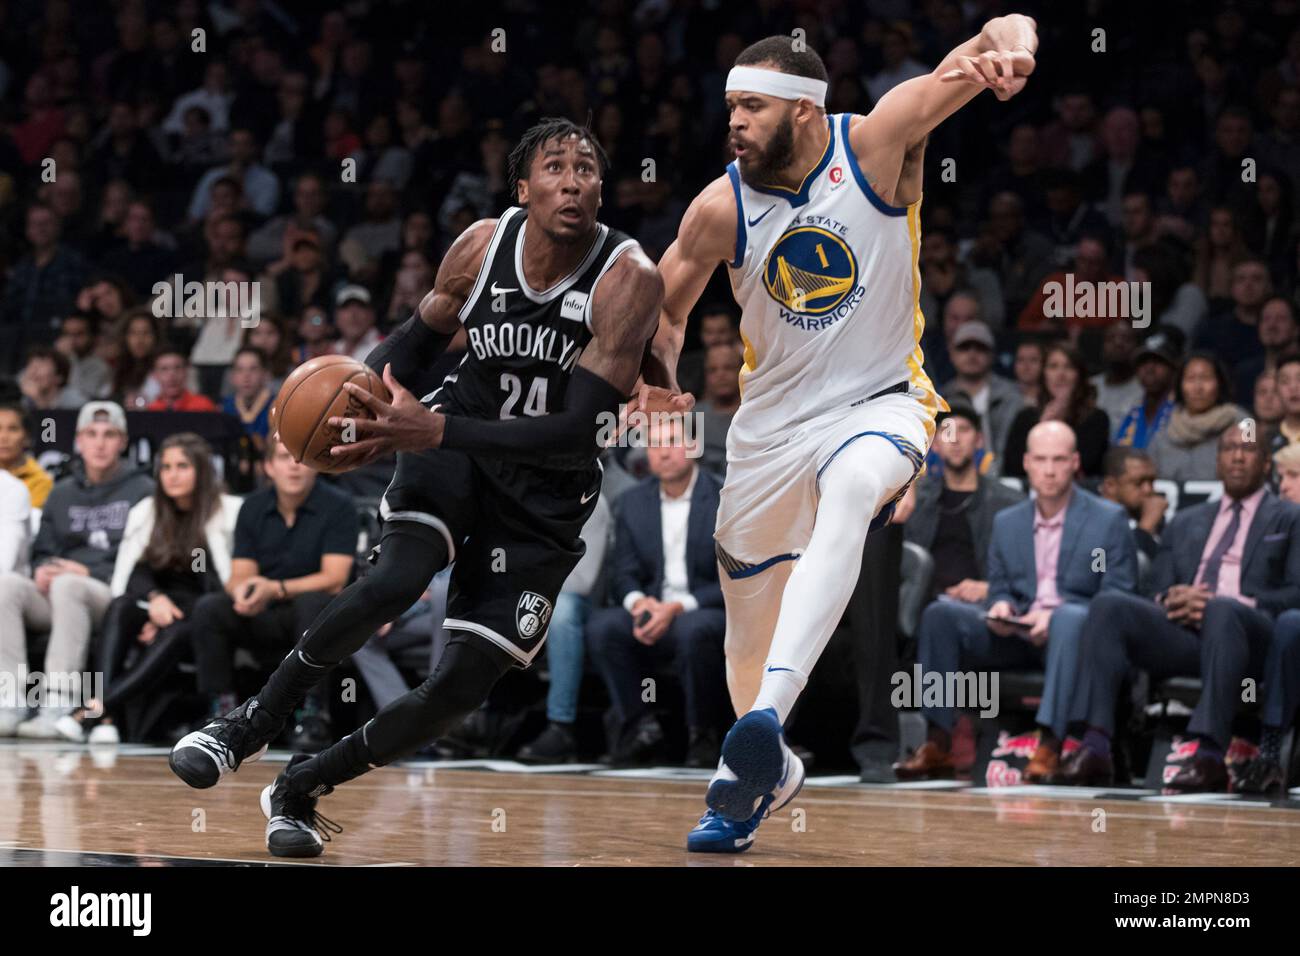 Brooklyn Nets forward Rondae Hollis-Jefferson (24) drives to the basket  against Golden State Warriors center JaVale McGee (1) during the second  half of an NBA basketball game, Sunday, Nov. 19, 2017, in